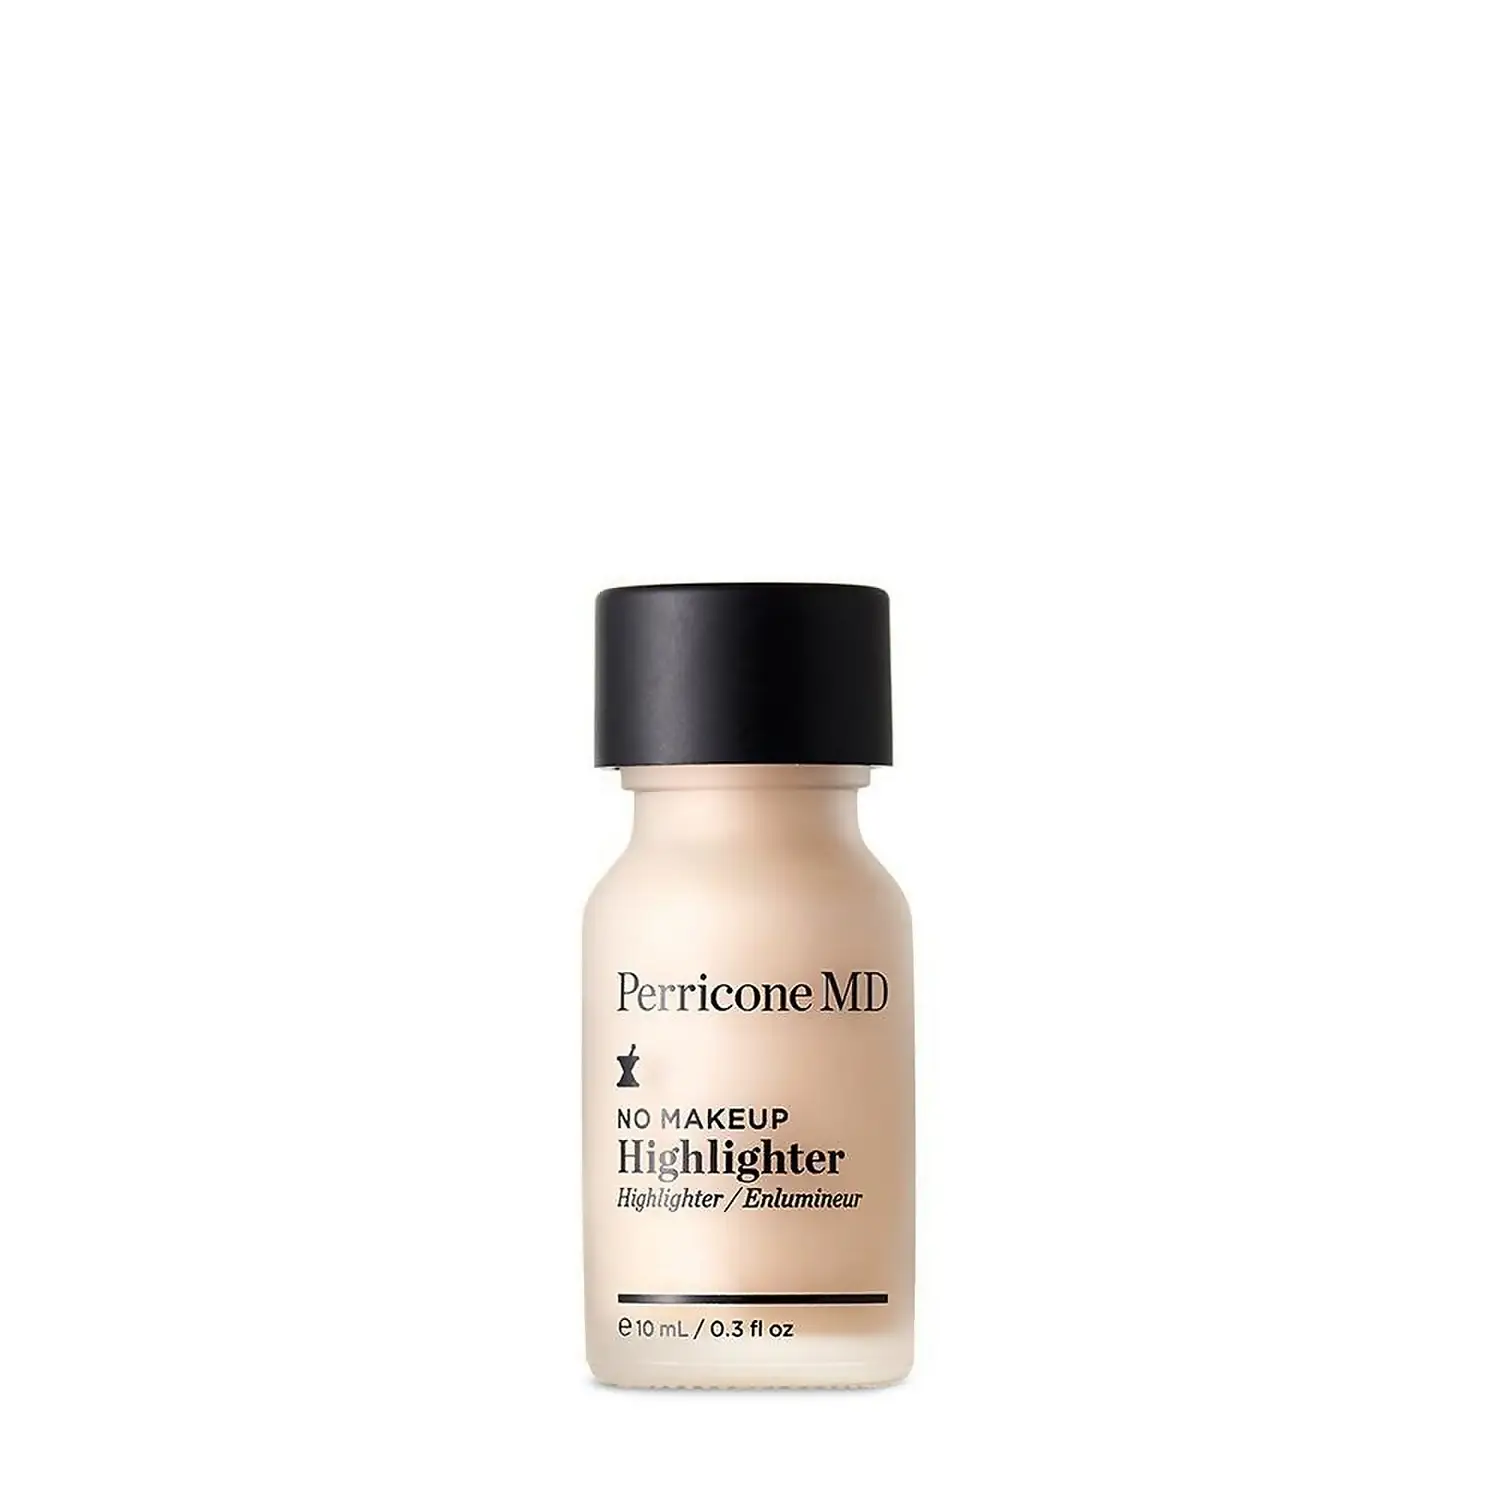 Pericone MD No Makeup Highlighter